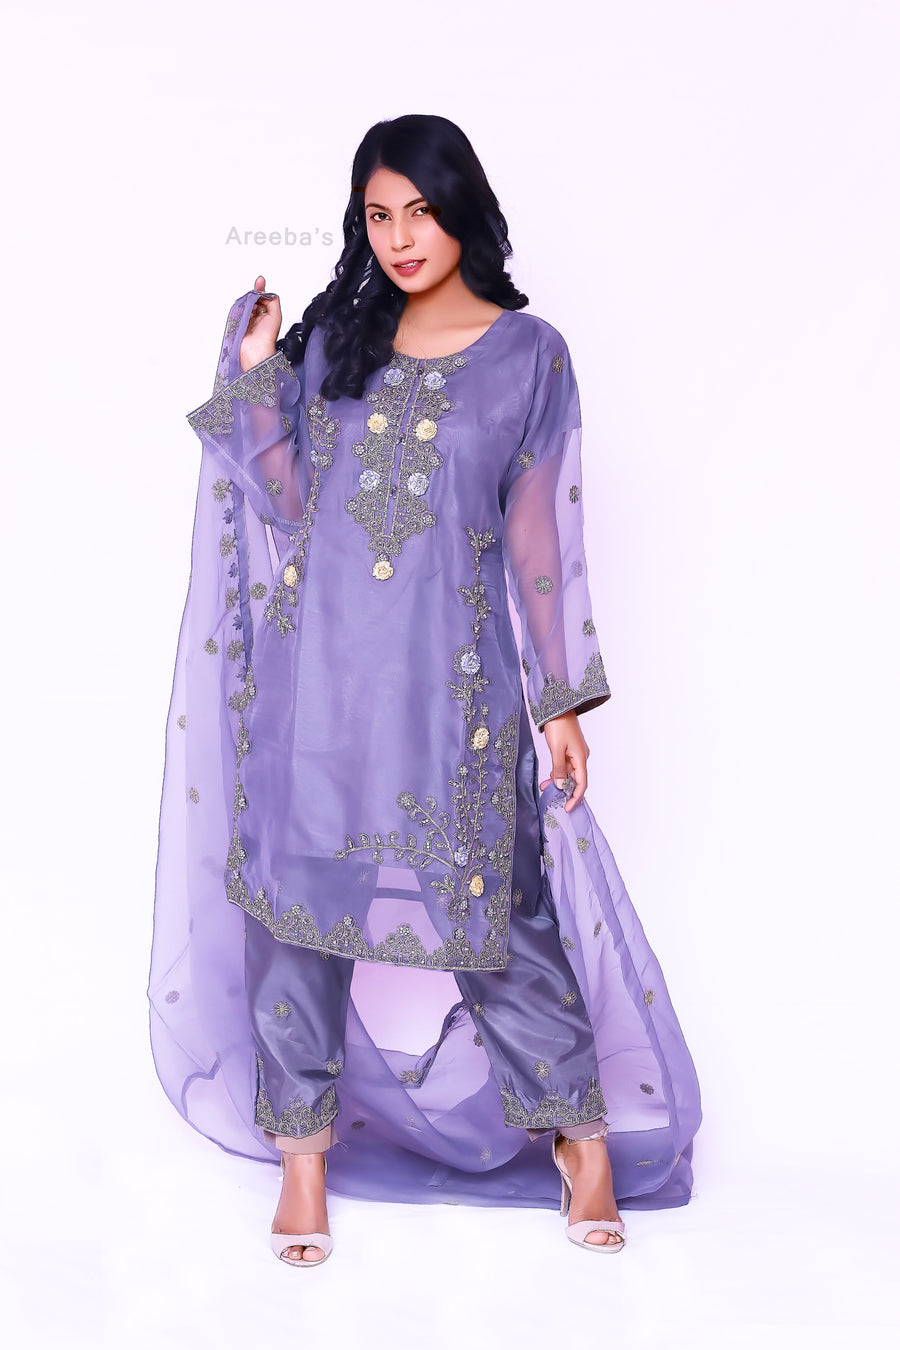 Nadia K Party suit AG3- Areeba's Couture